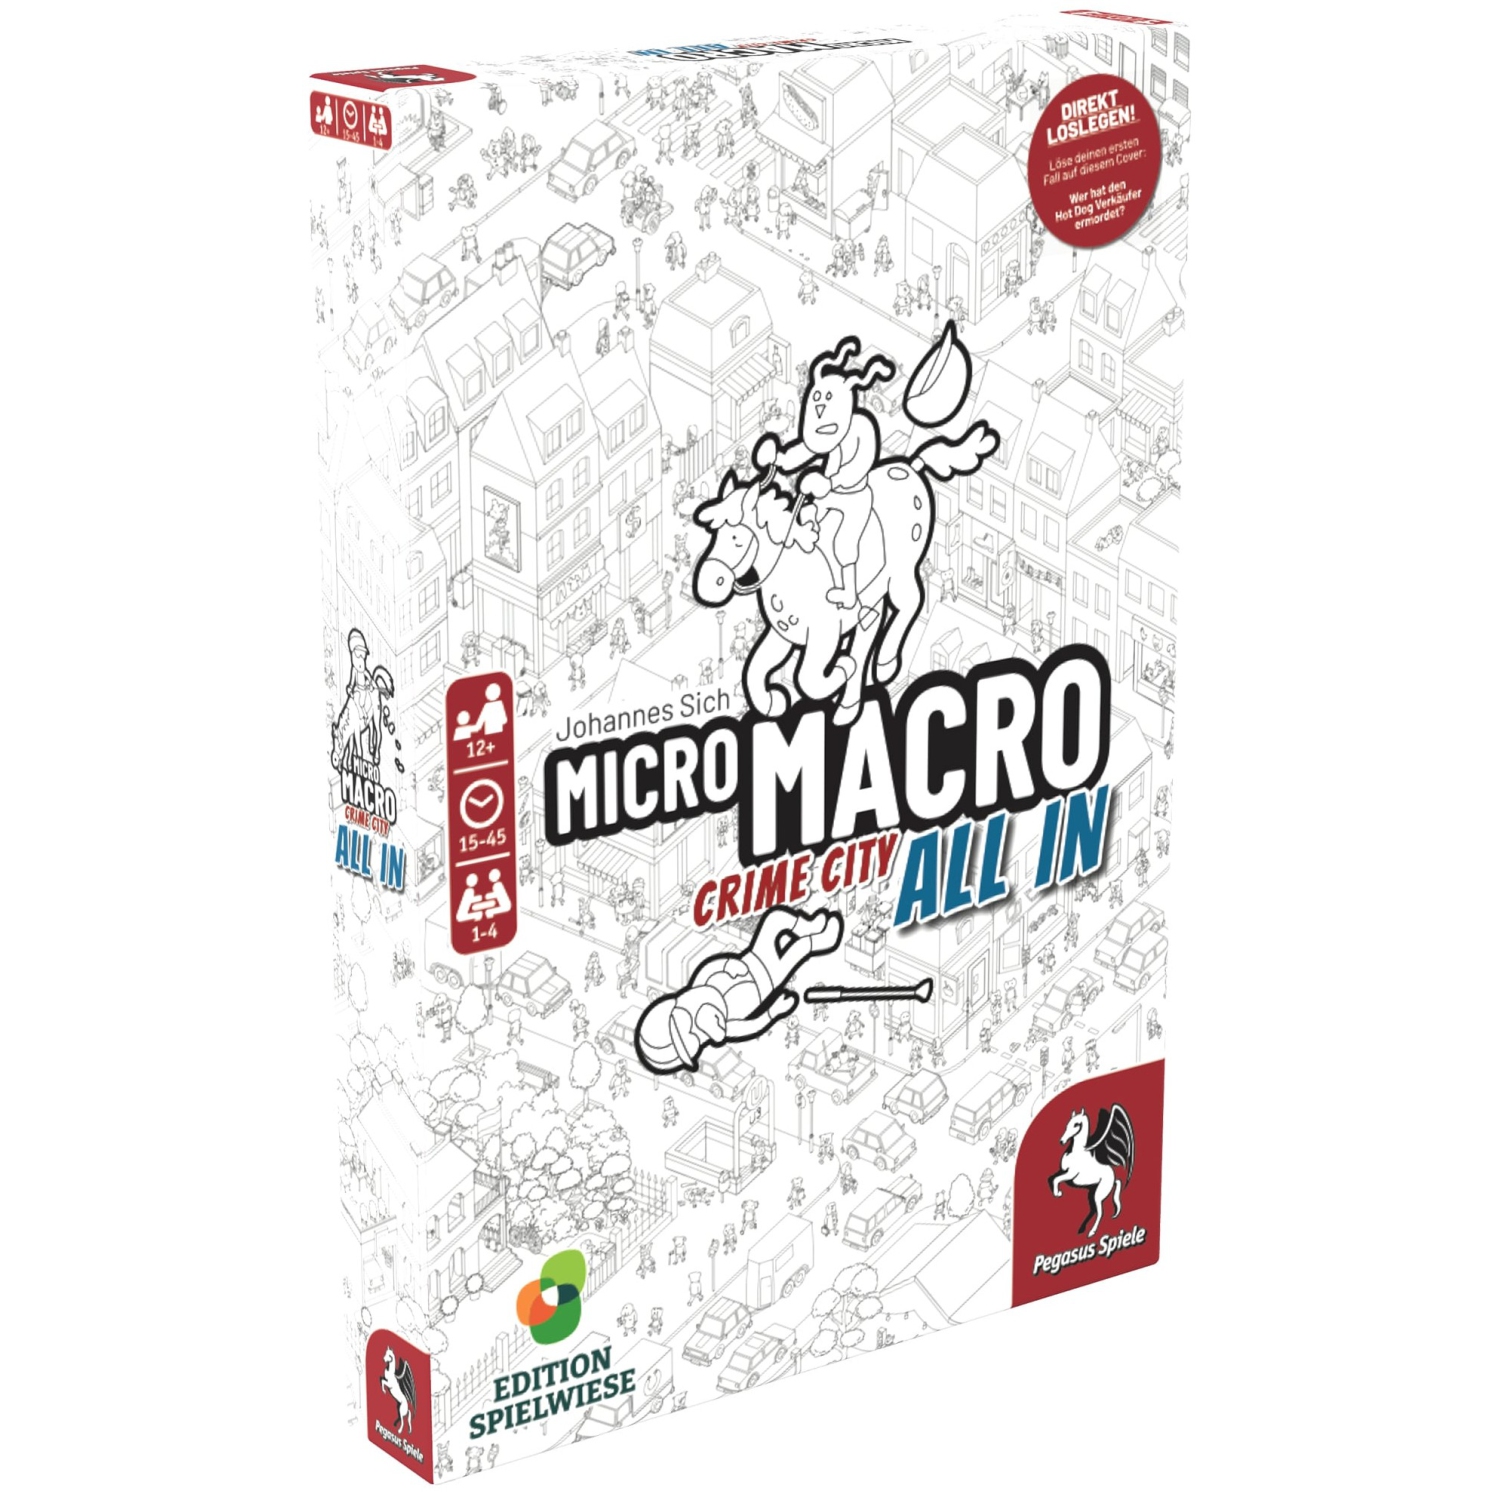 Pegasus Spiele GmbH MicroMacro: Crime City 3 - All In 1-4 players, ages 12+, 15-45 minutes